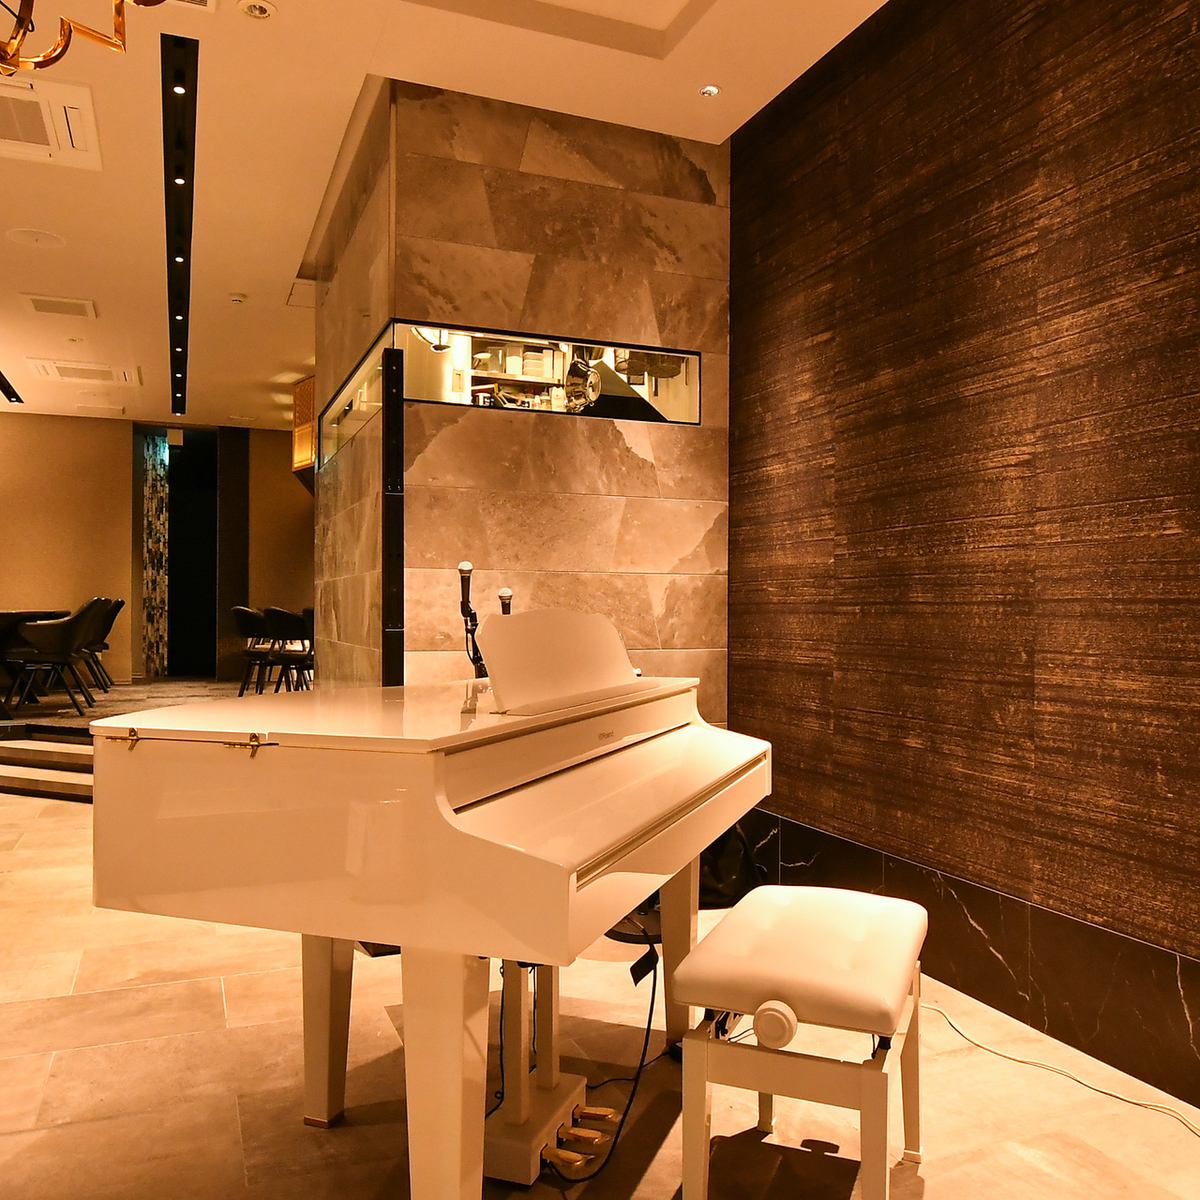 [Luxury space◎] Luxury space with automatic piano and lacquer finish